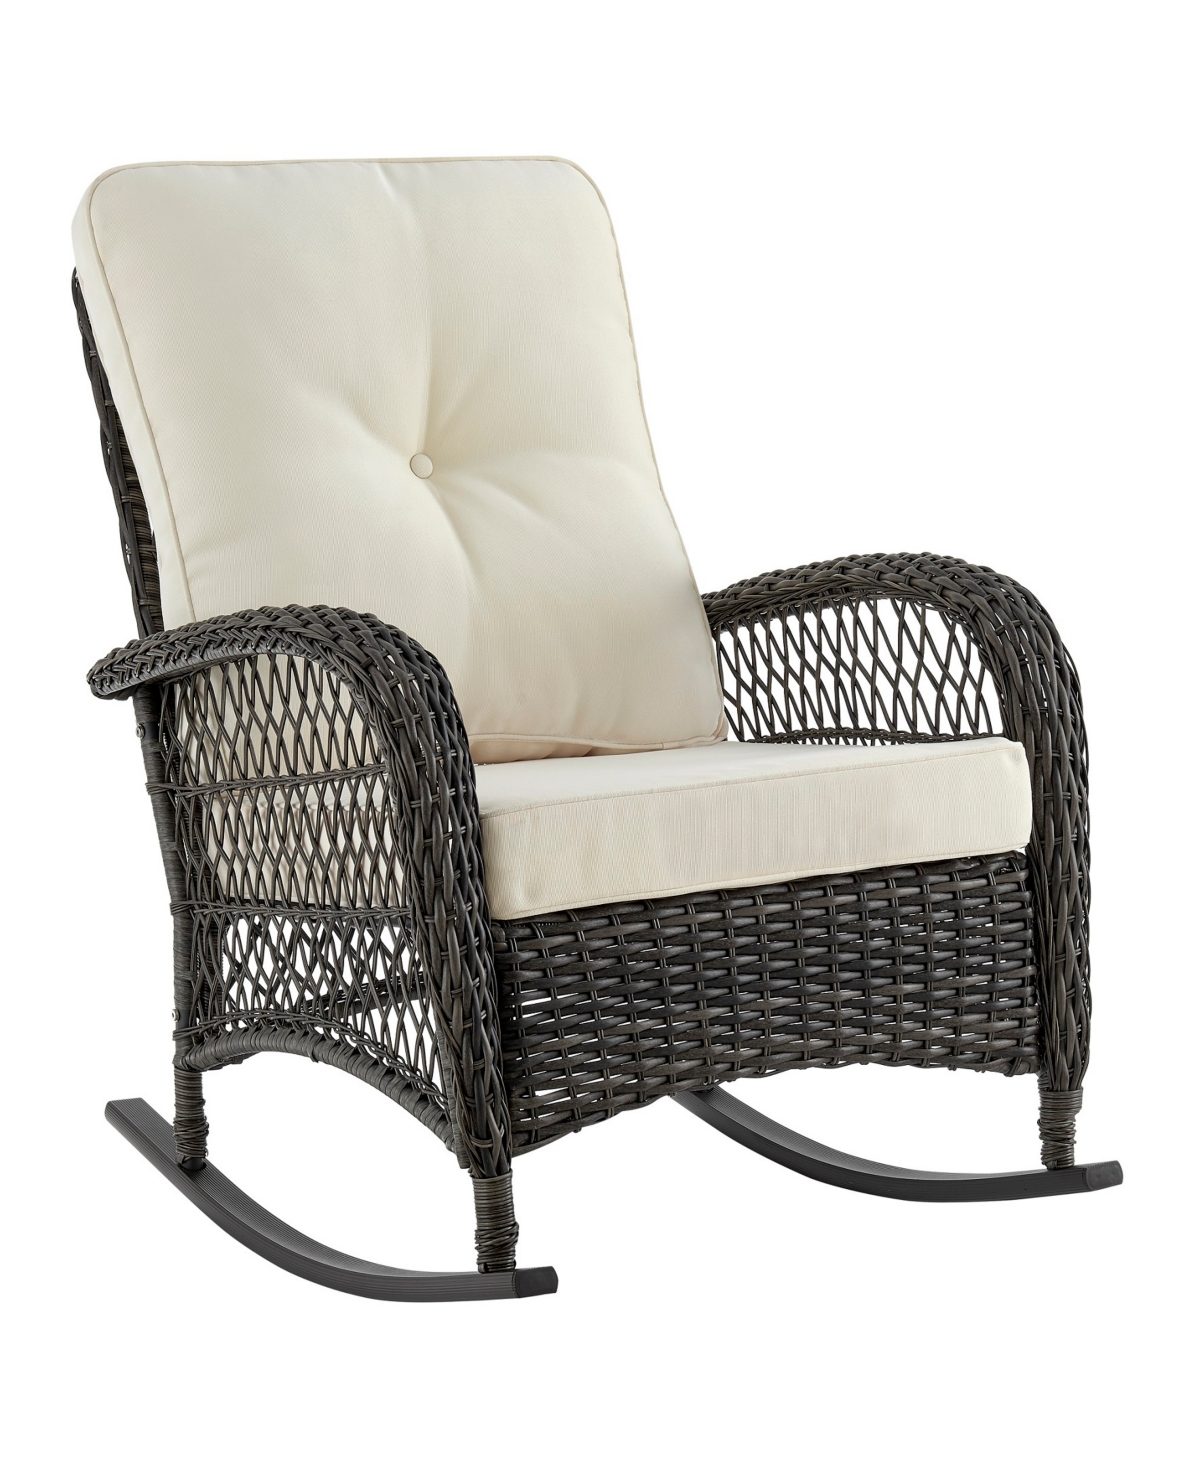 Manhattan Comfort 29.52" Fruttuo Steel Polyester Upholstered Rocking Chair In Mixed Gray Weave And Cream